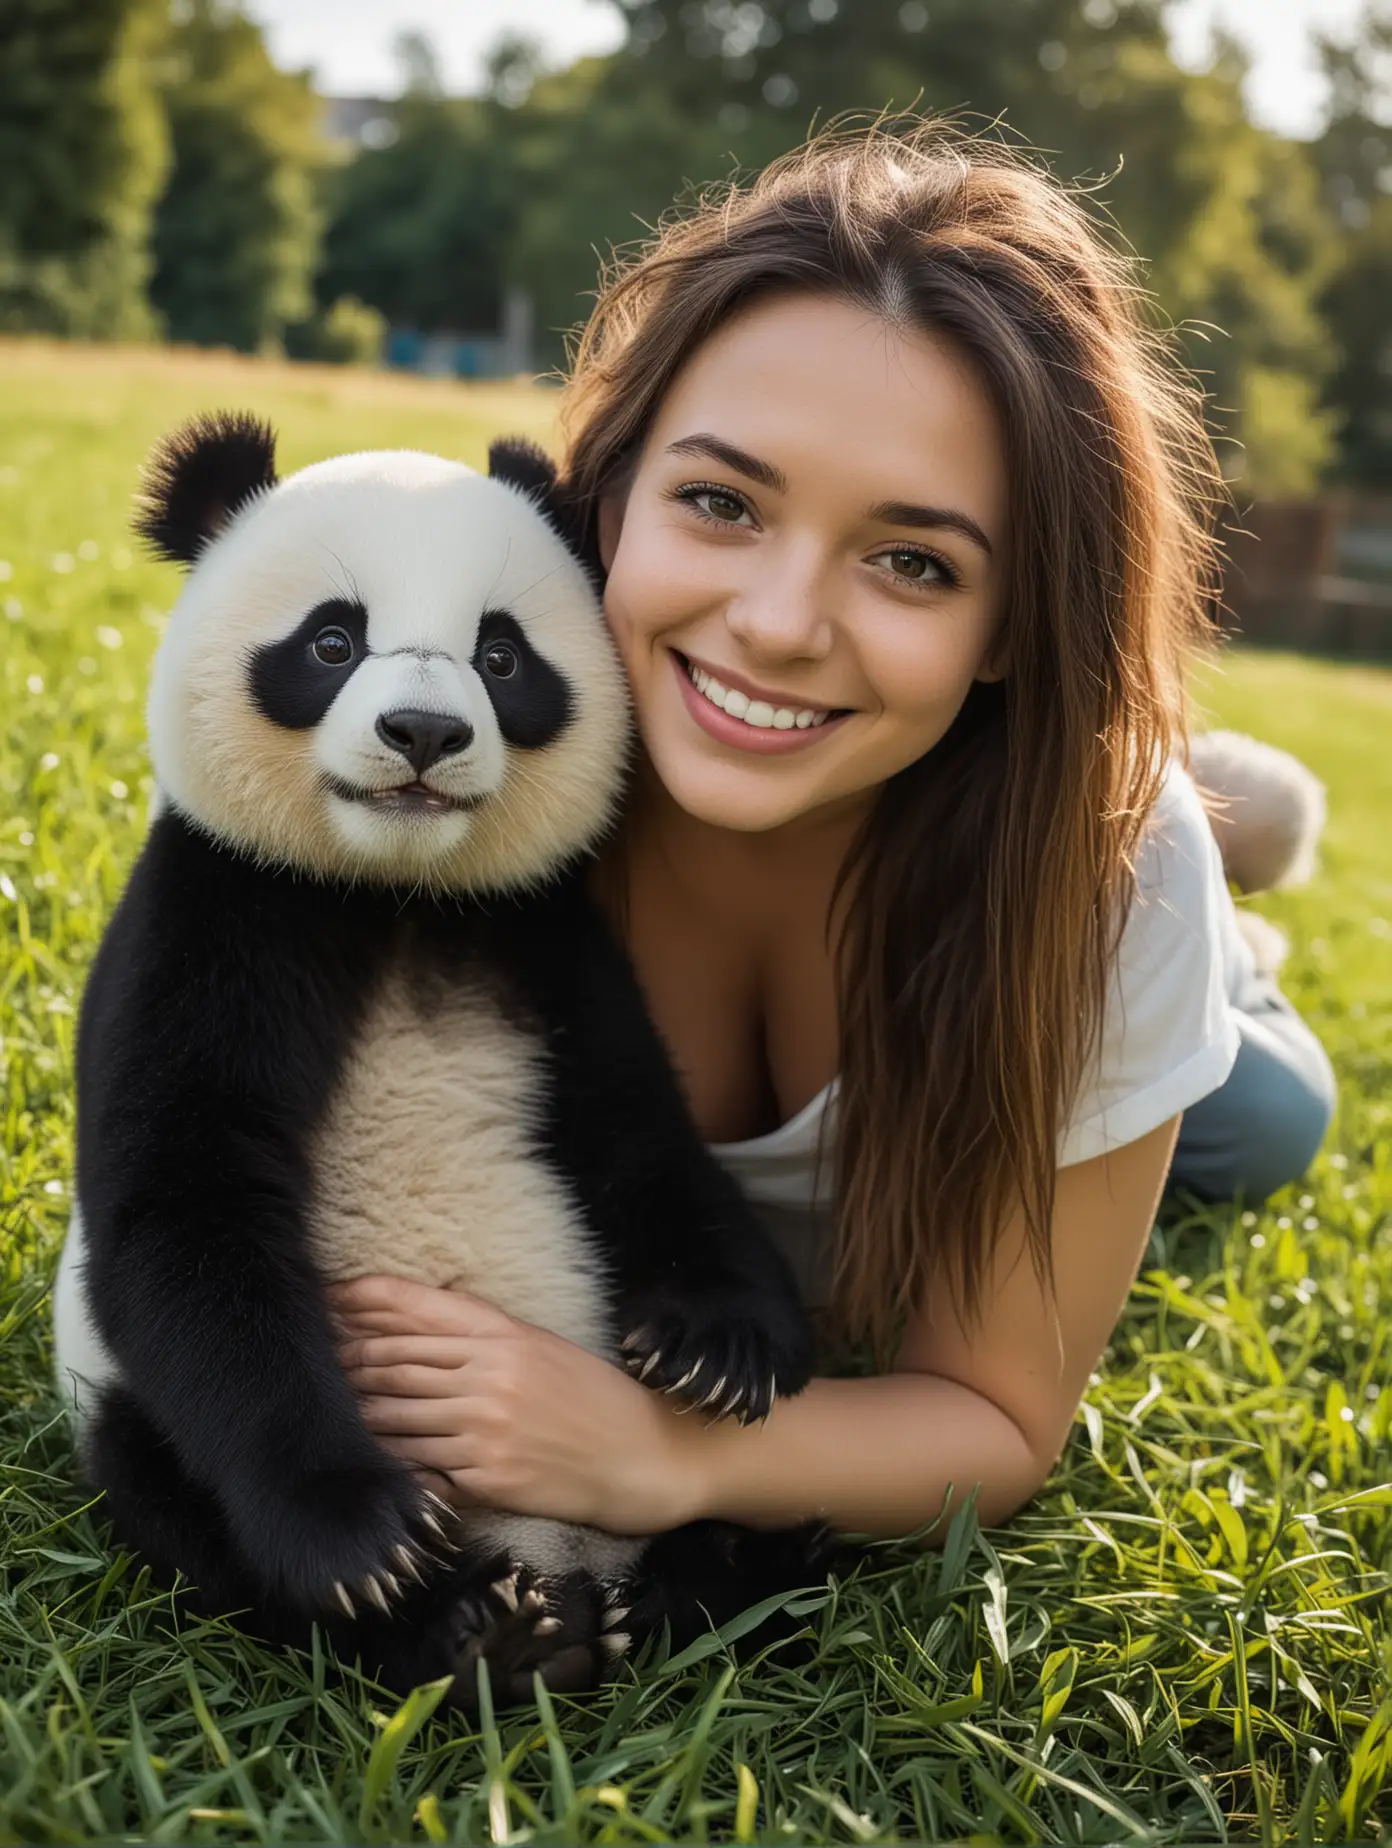 Cheerful Woman Poses with Panda in Sunny Outdoor Photoshoot